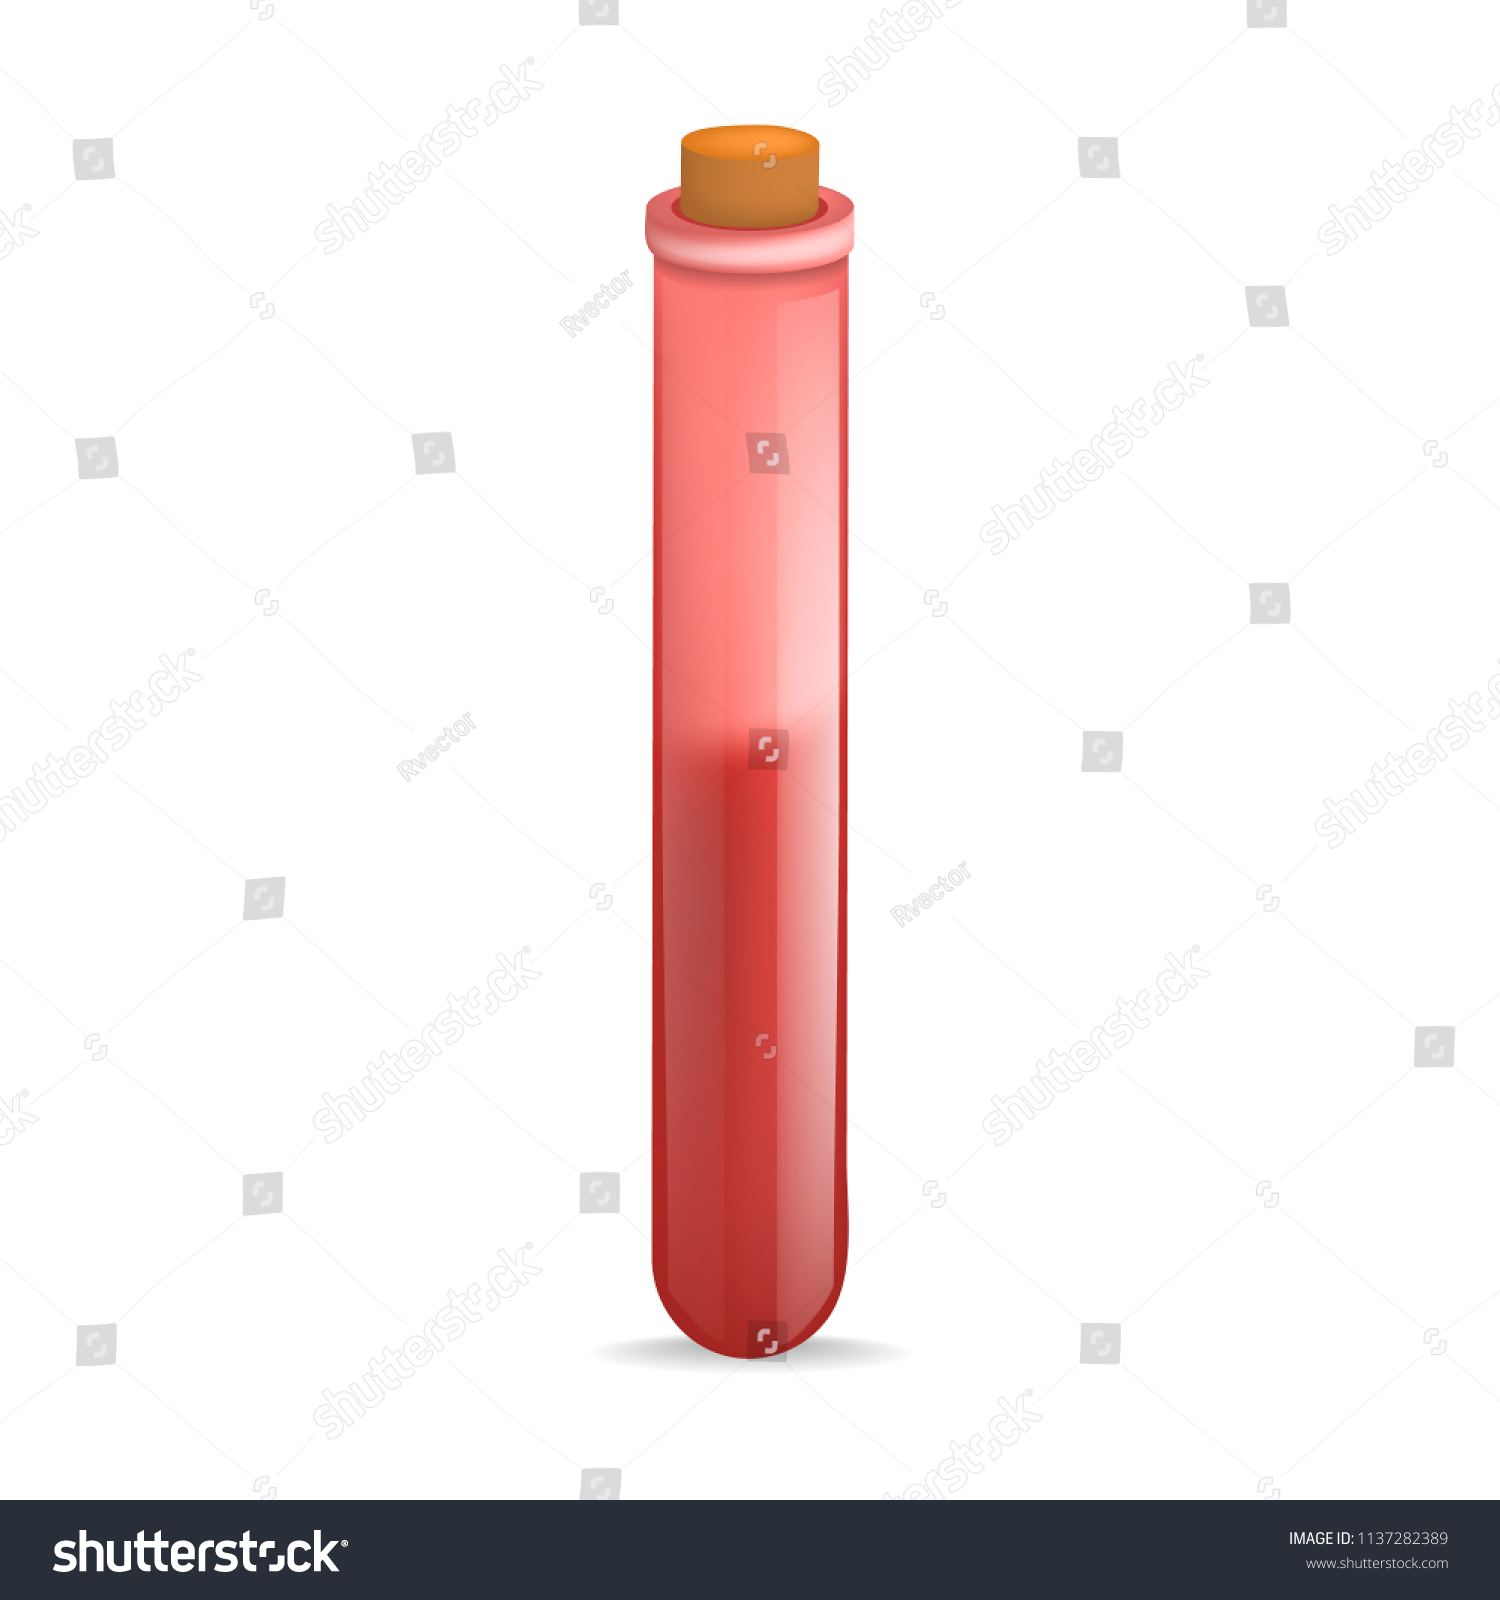 Download Red Test Tube Mockup Realistic Illustration Stock Vector Royalty Free 1137282389